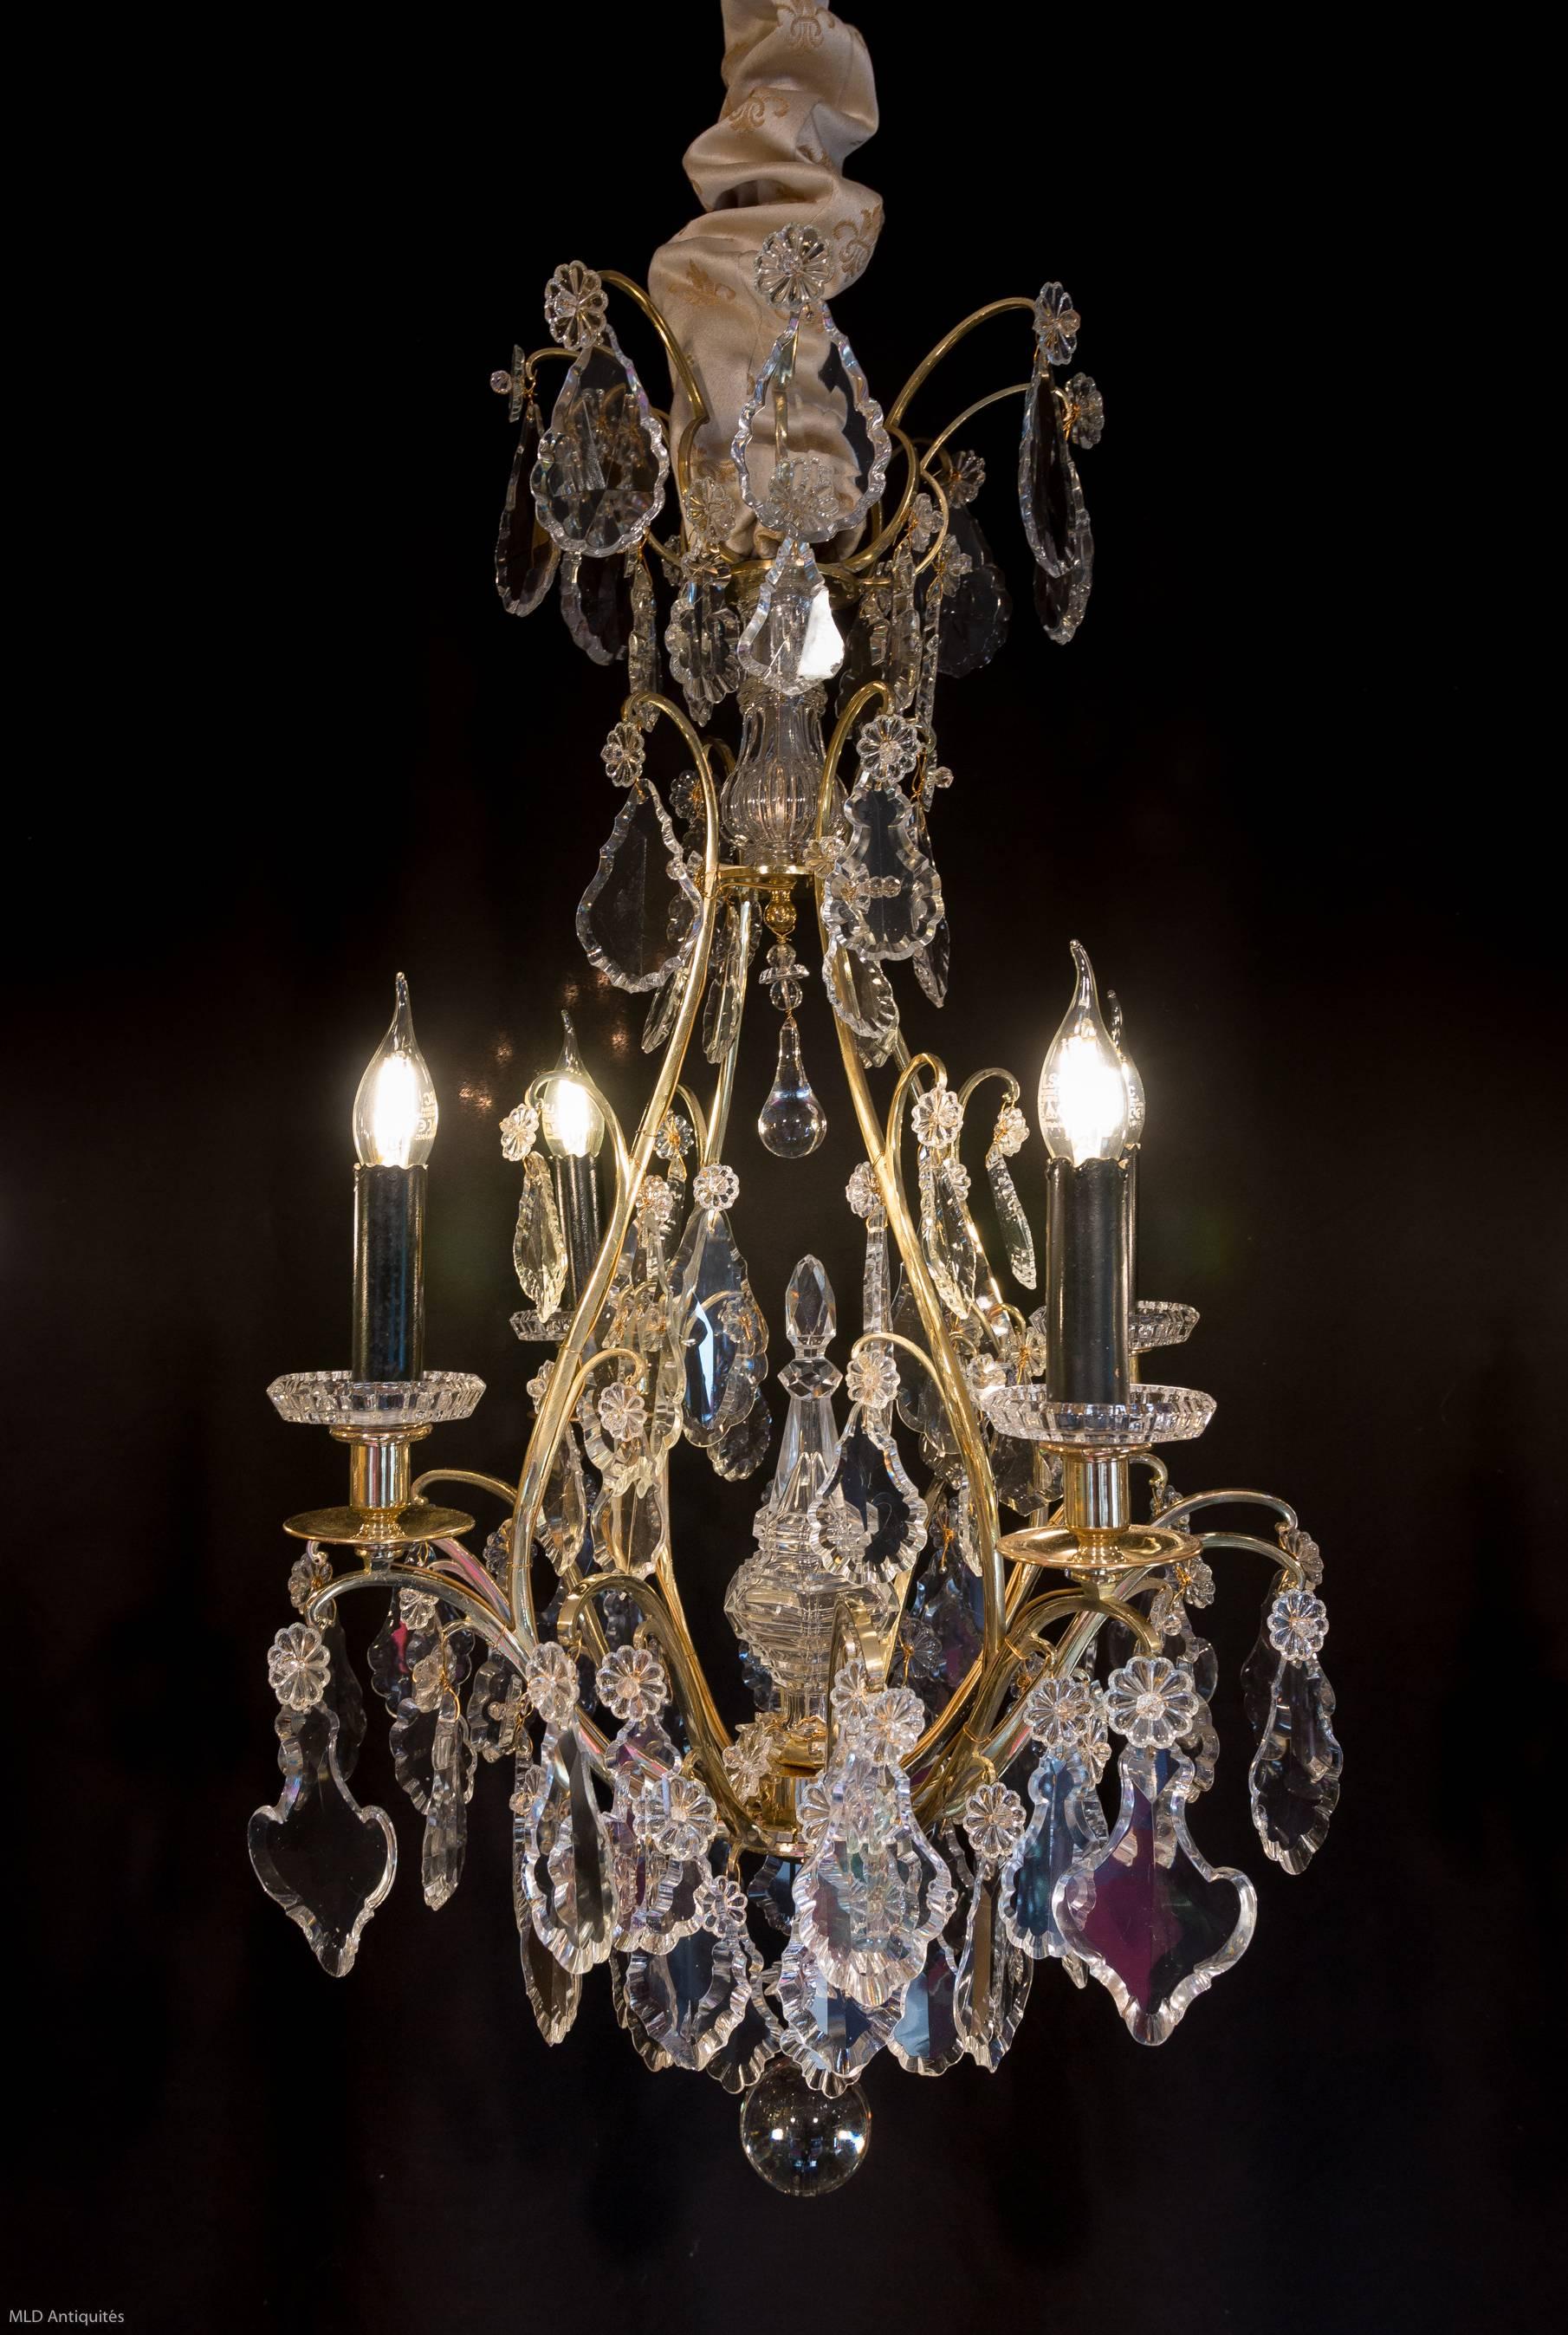 We have the pleasure to present you a lovely, original gilt bronze and hand cut crystal, small form cage chandelier in the Classic Louis XV style.
Our chandelier is composed of four perimeter arm lights, on the centre beautiful crystal